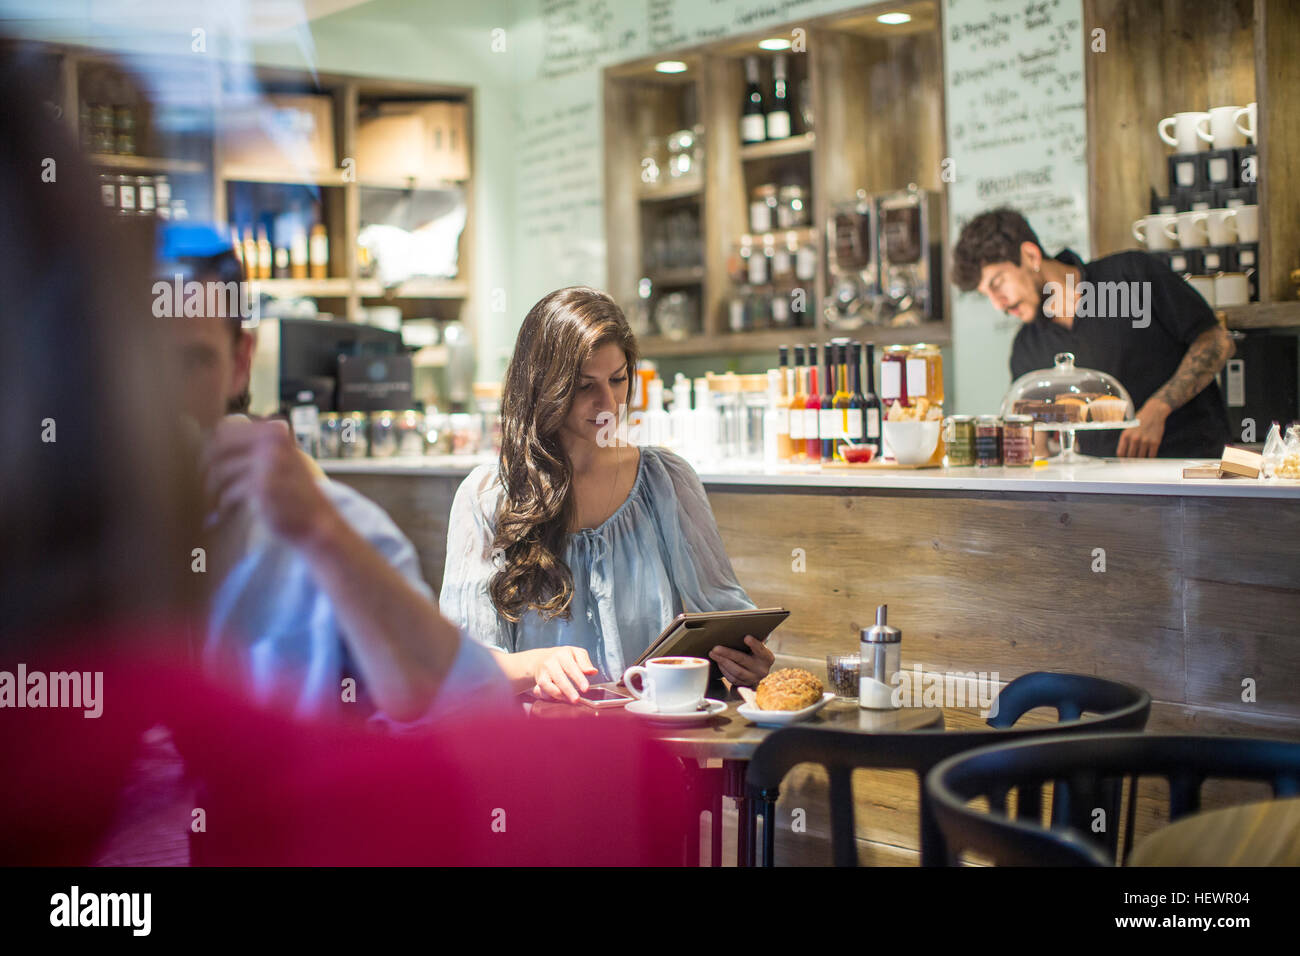 Young woman looking at digital tablet in cafe Stock Photo